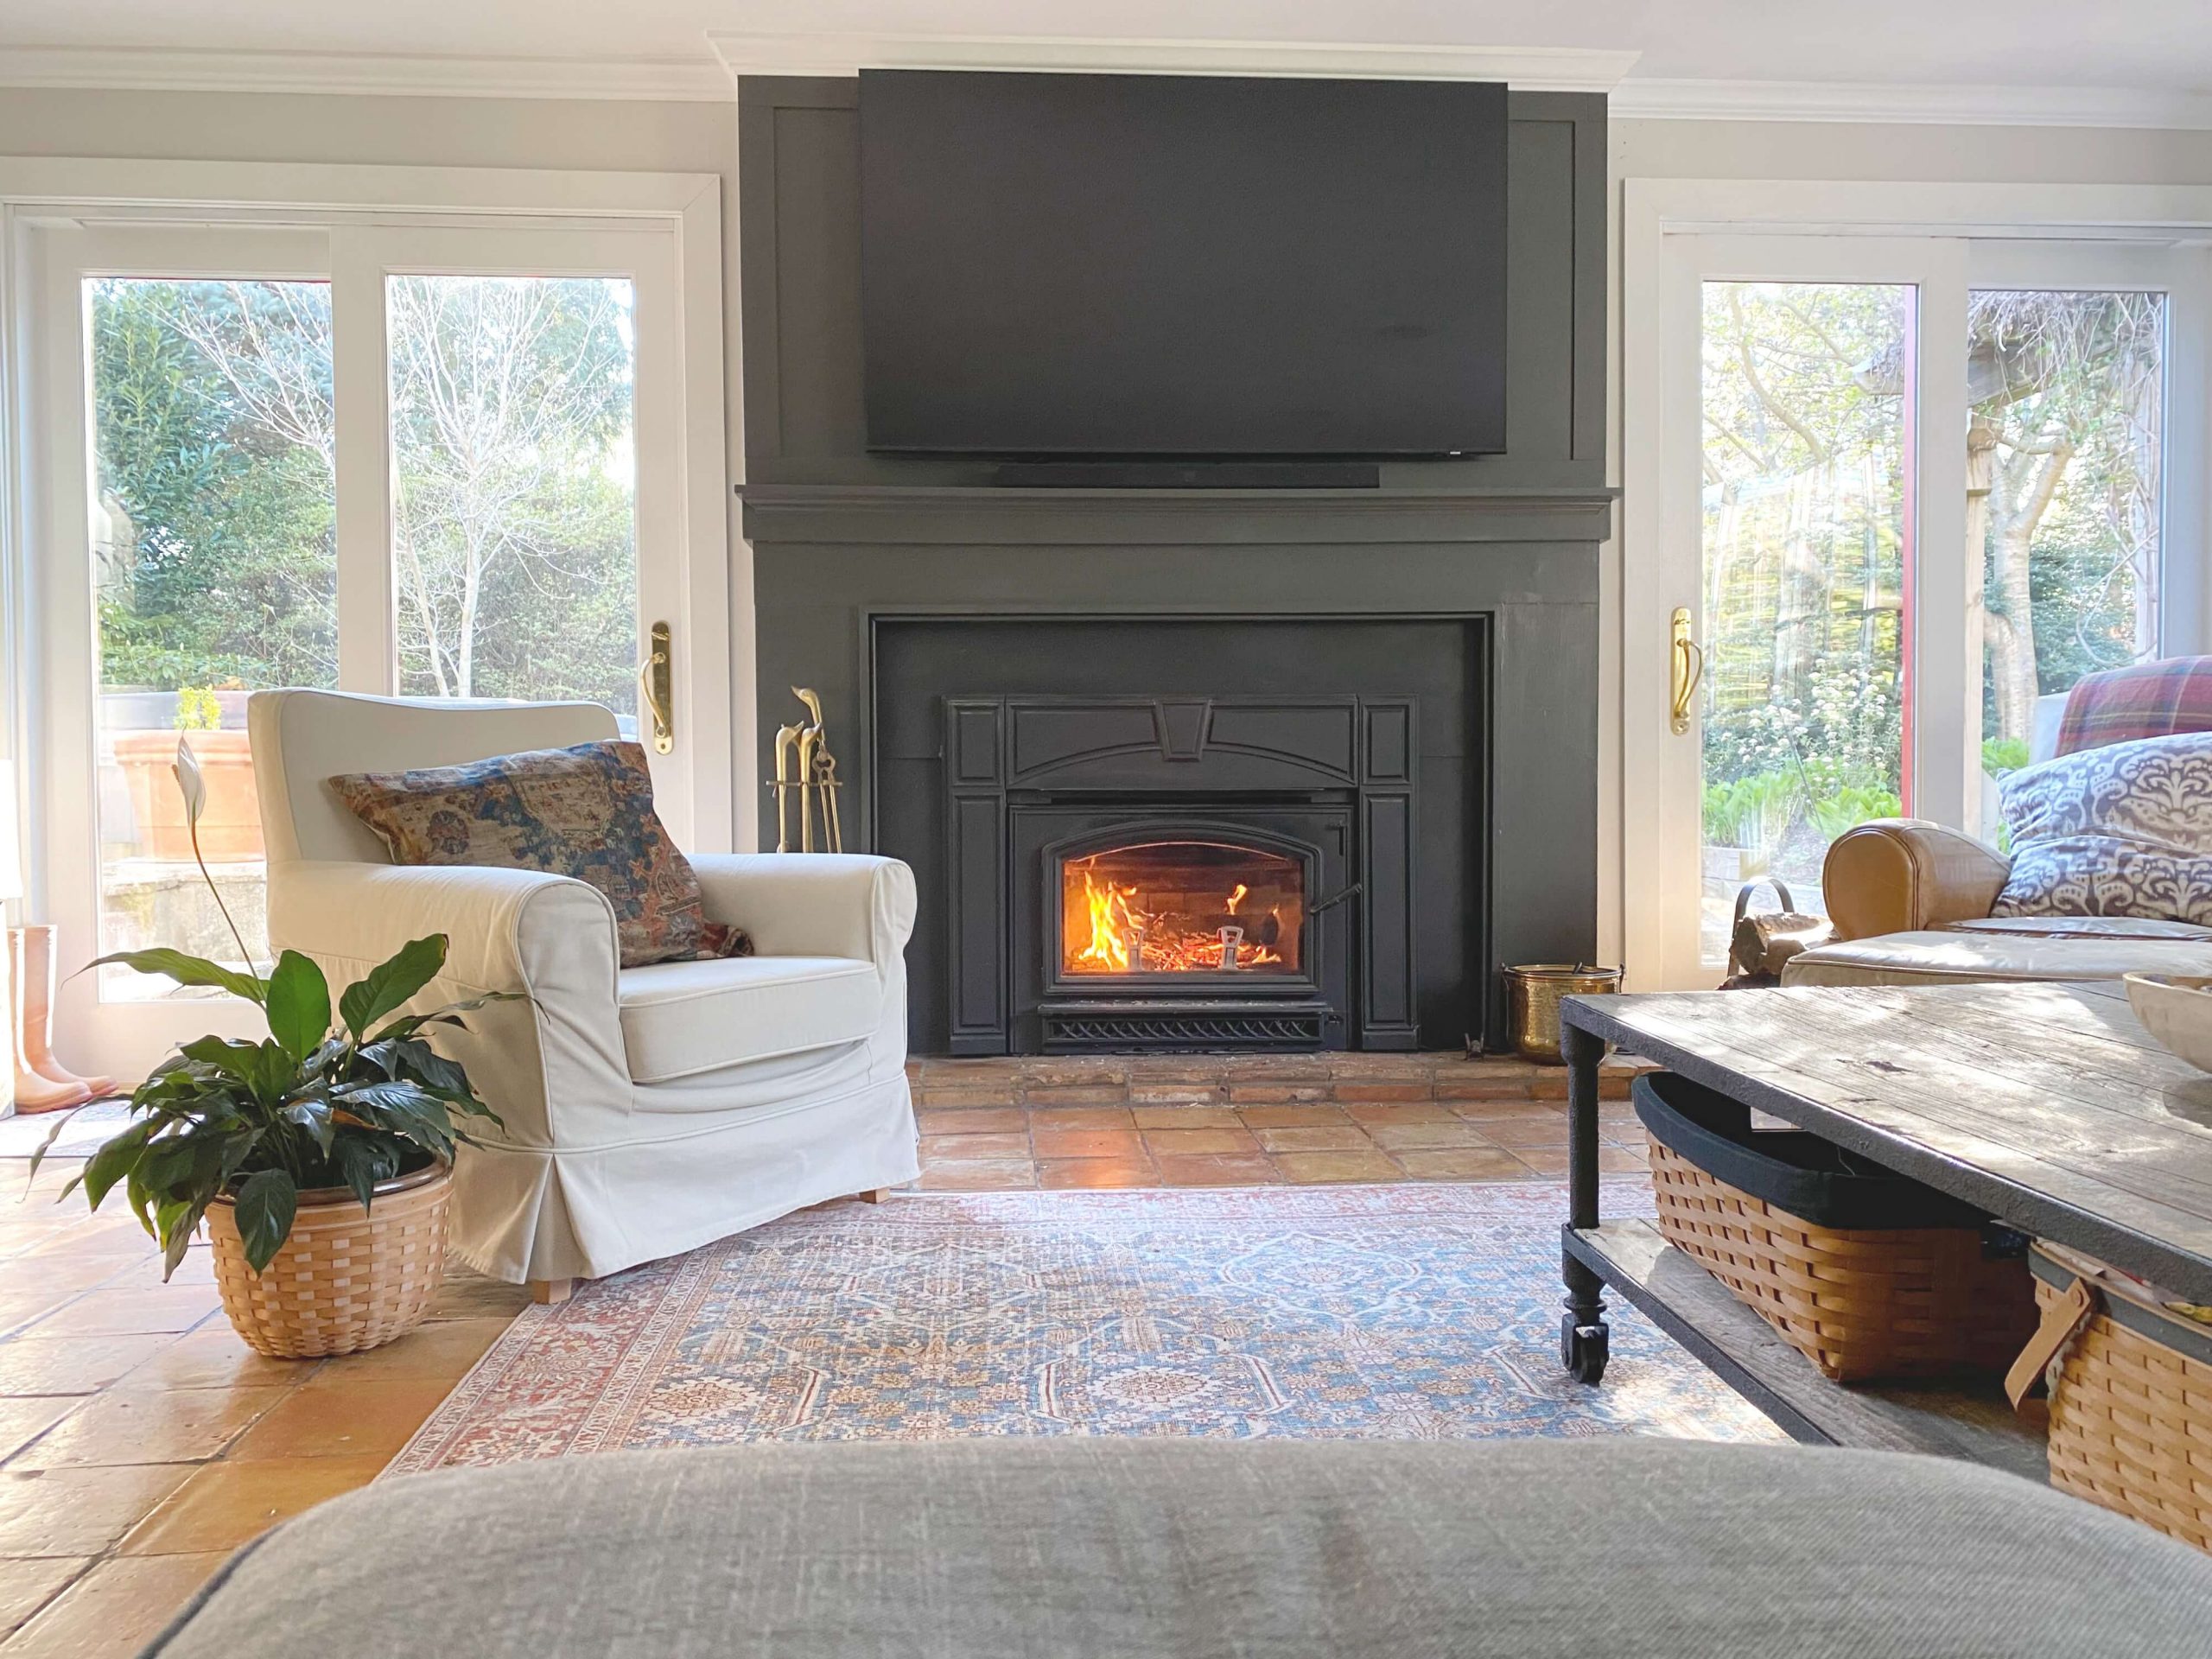 Sharing all of our tips, tricks & ideas for a easy awesome fireplace makeover from our farmhouse family room fireplace makeover with before & after pictures on a budget & 3 reasons why we decided to paint our fireplace black! #fireplacemakeover #blackfireplace #farmhousefireplace #mantelmakeover https://lehmanlane.net